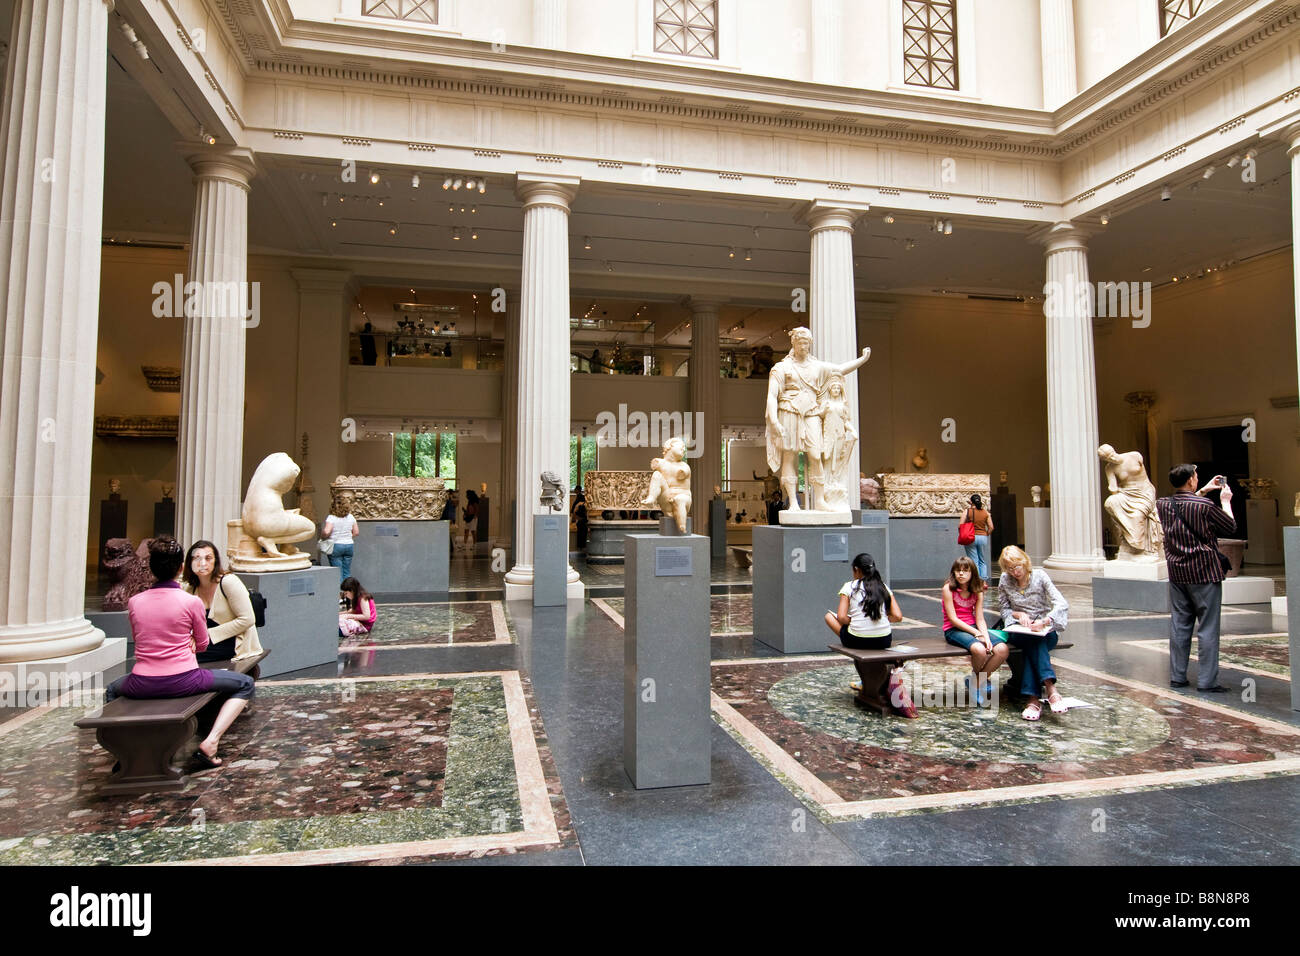 Visitors to the Metropolitan Museum of Art sitting on benches in an internal courtyard surrounded by classical sculptures Stock Photo